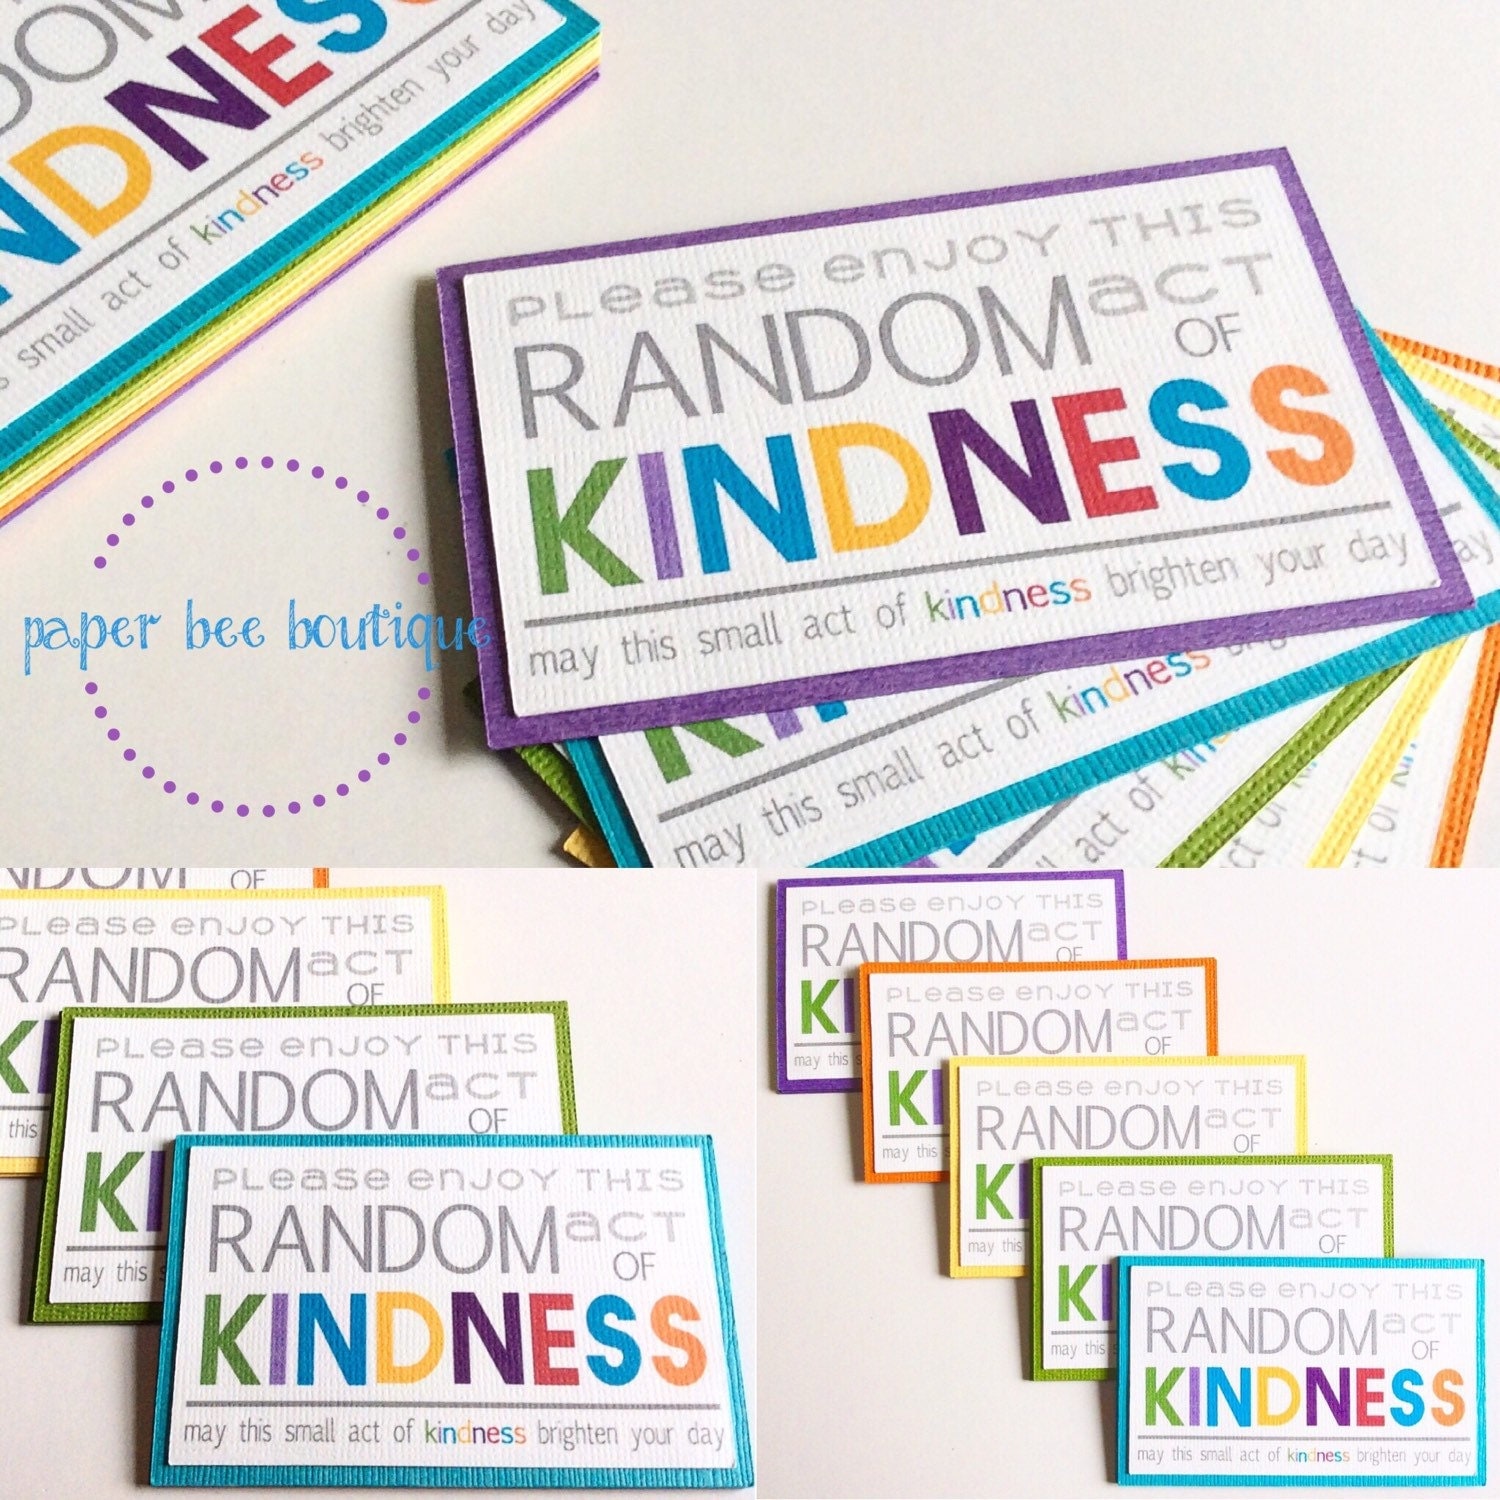 Random Acts of Kindness Cards Already by PaperBeeBoutique on Etsy